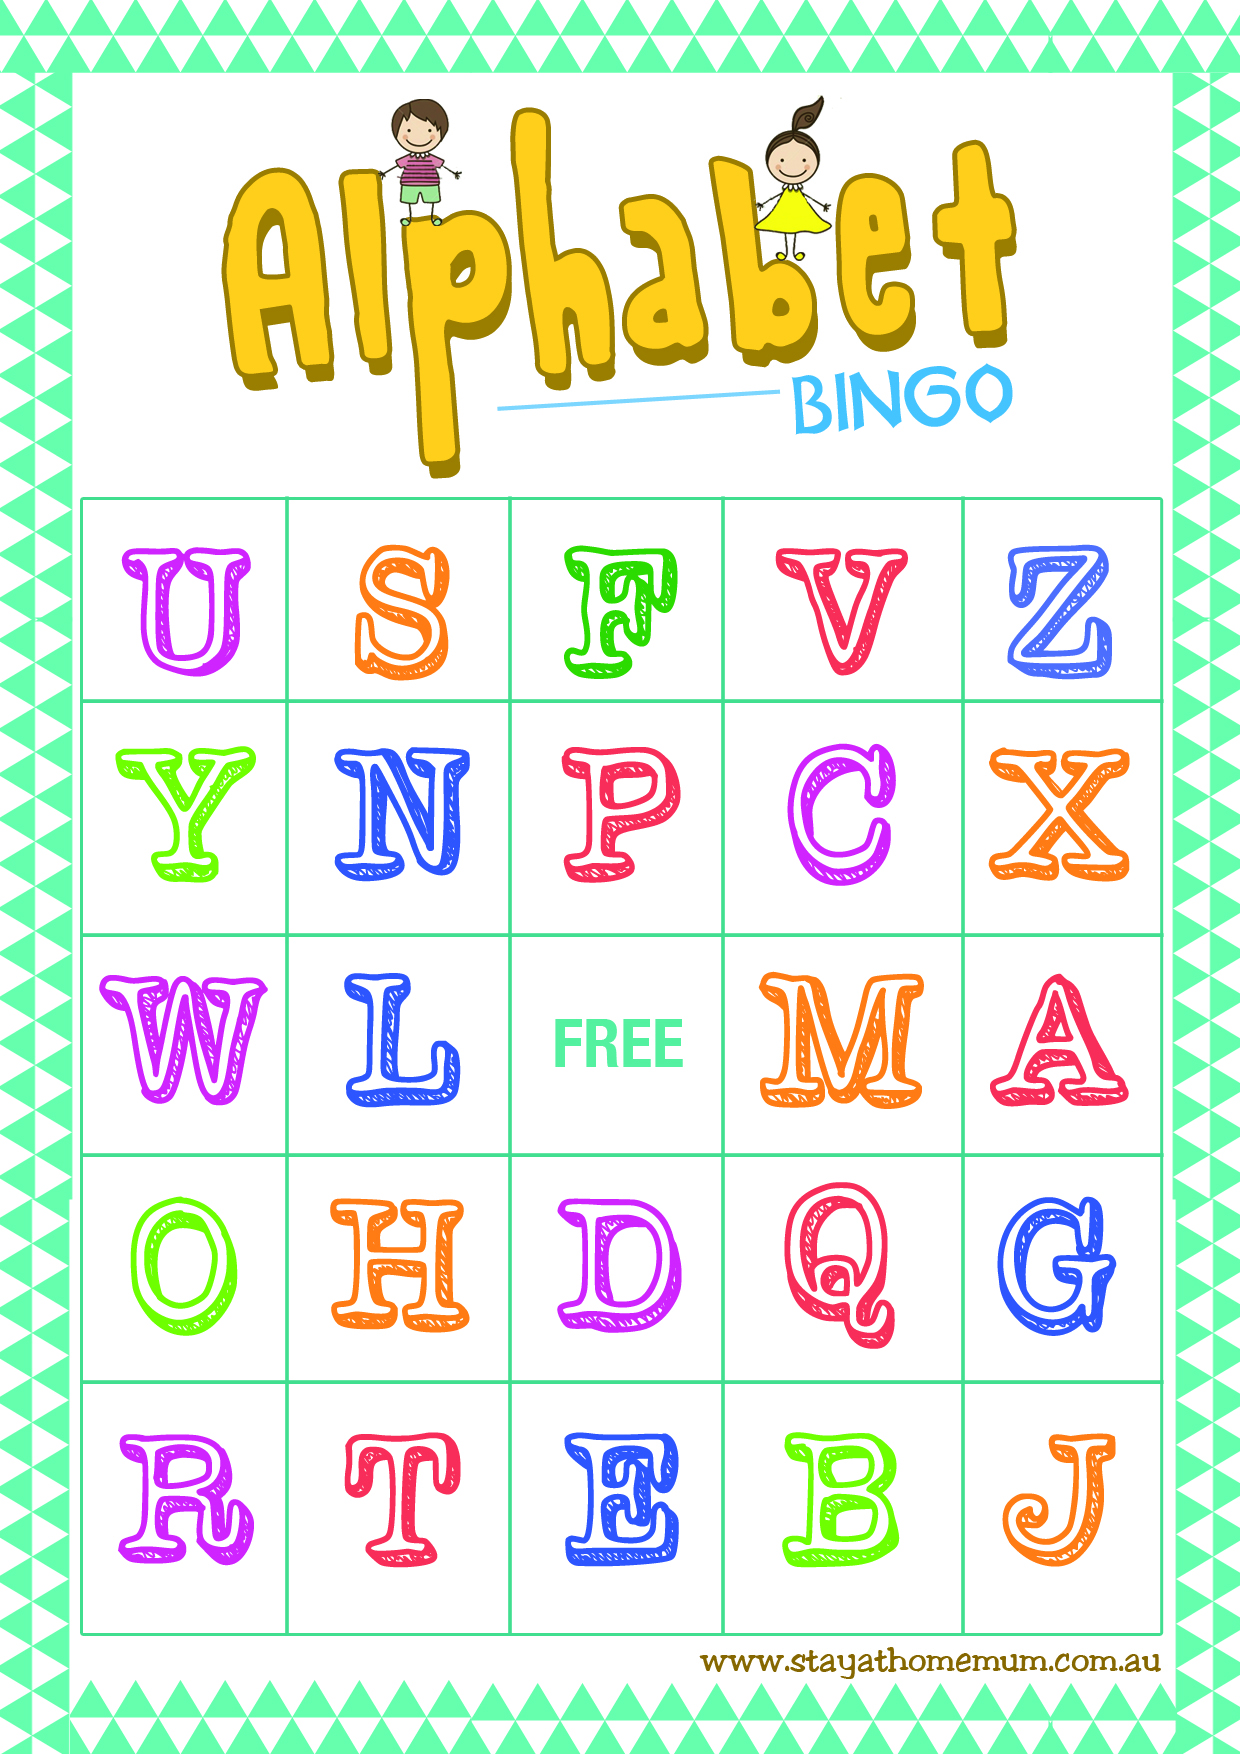 buy-deeplay-alphabet-bingo-game-card-educational-abc-letters-animals-recognition-learning-bingo